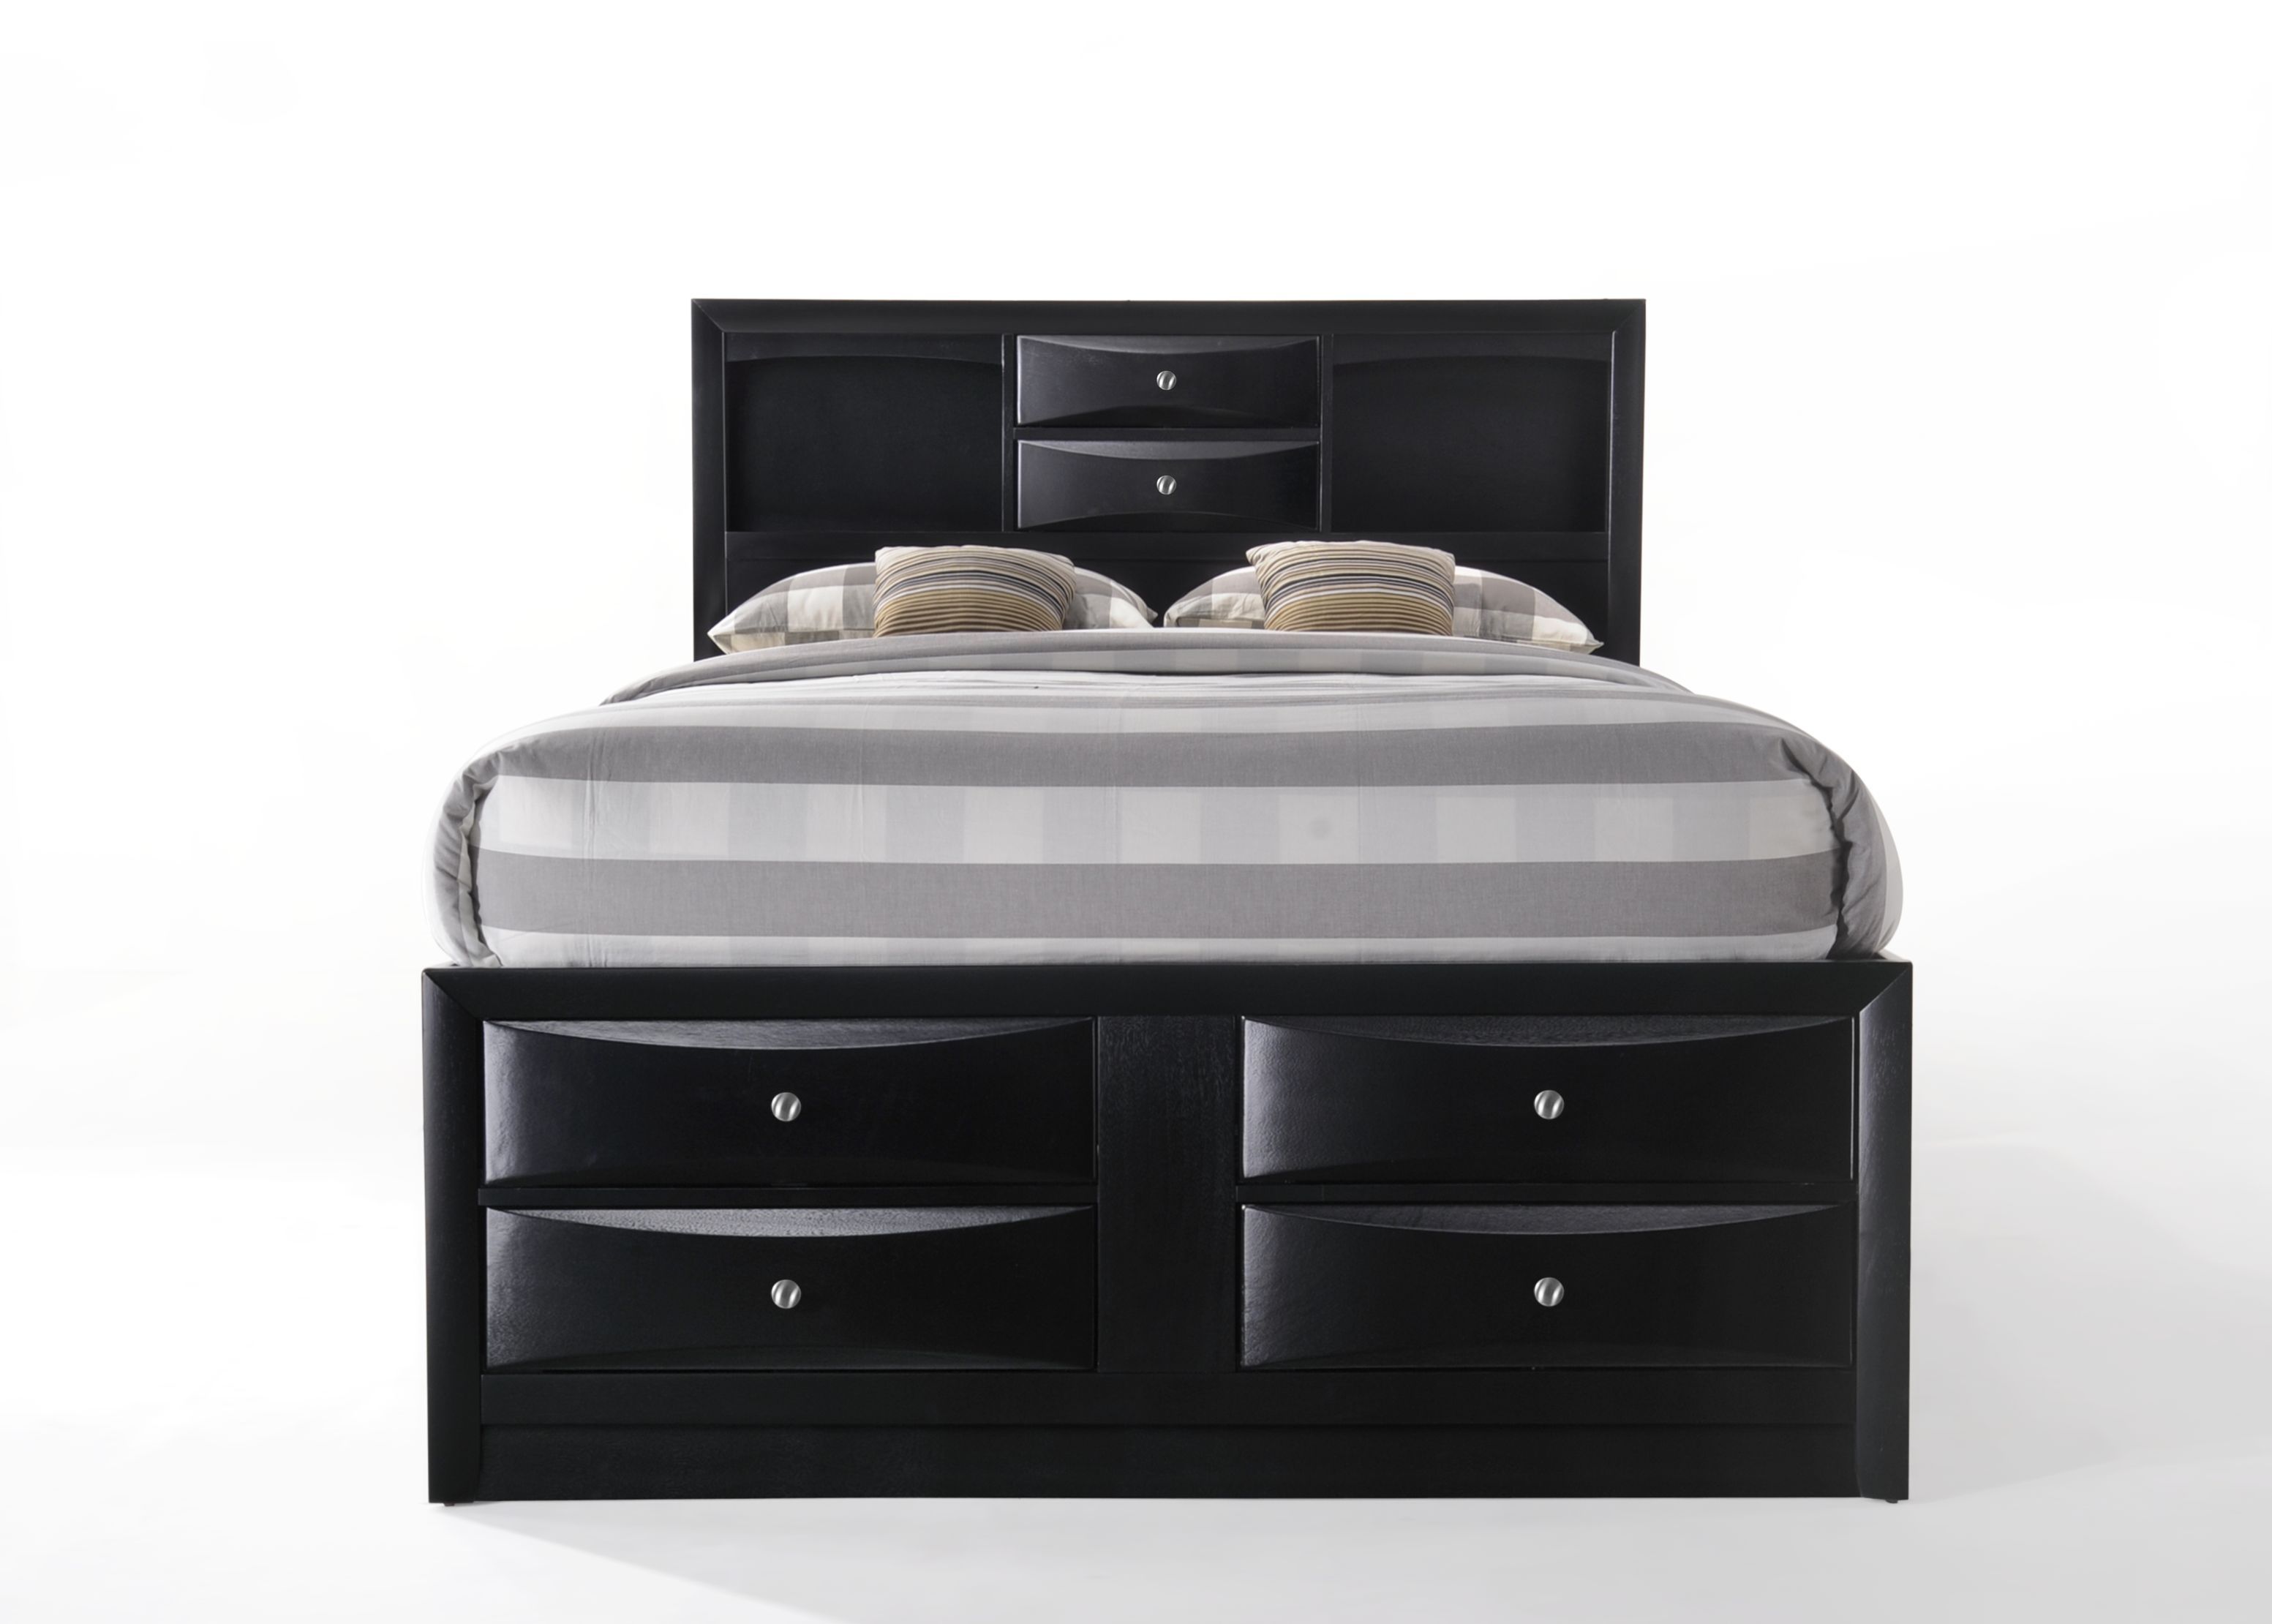 Miekor Furniture Ireland Full Bed in Black - image 3 of 6